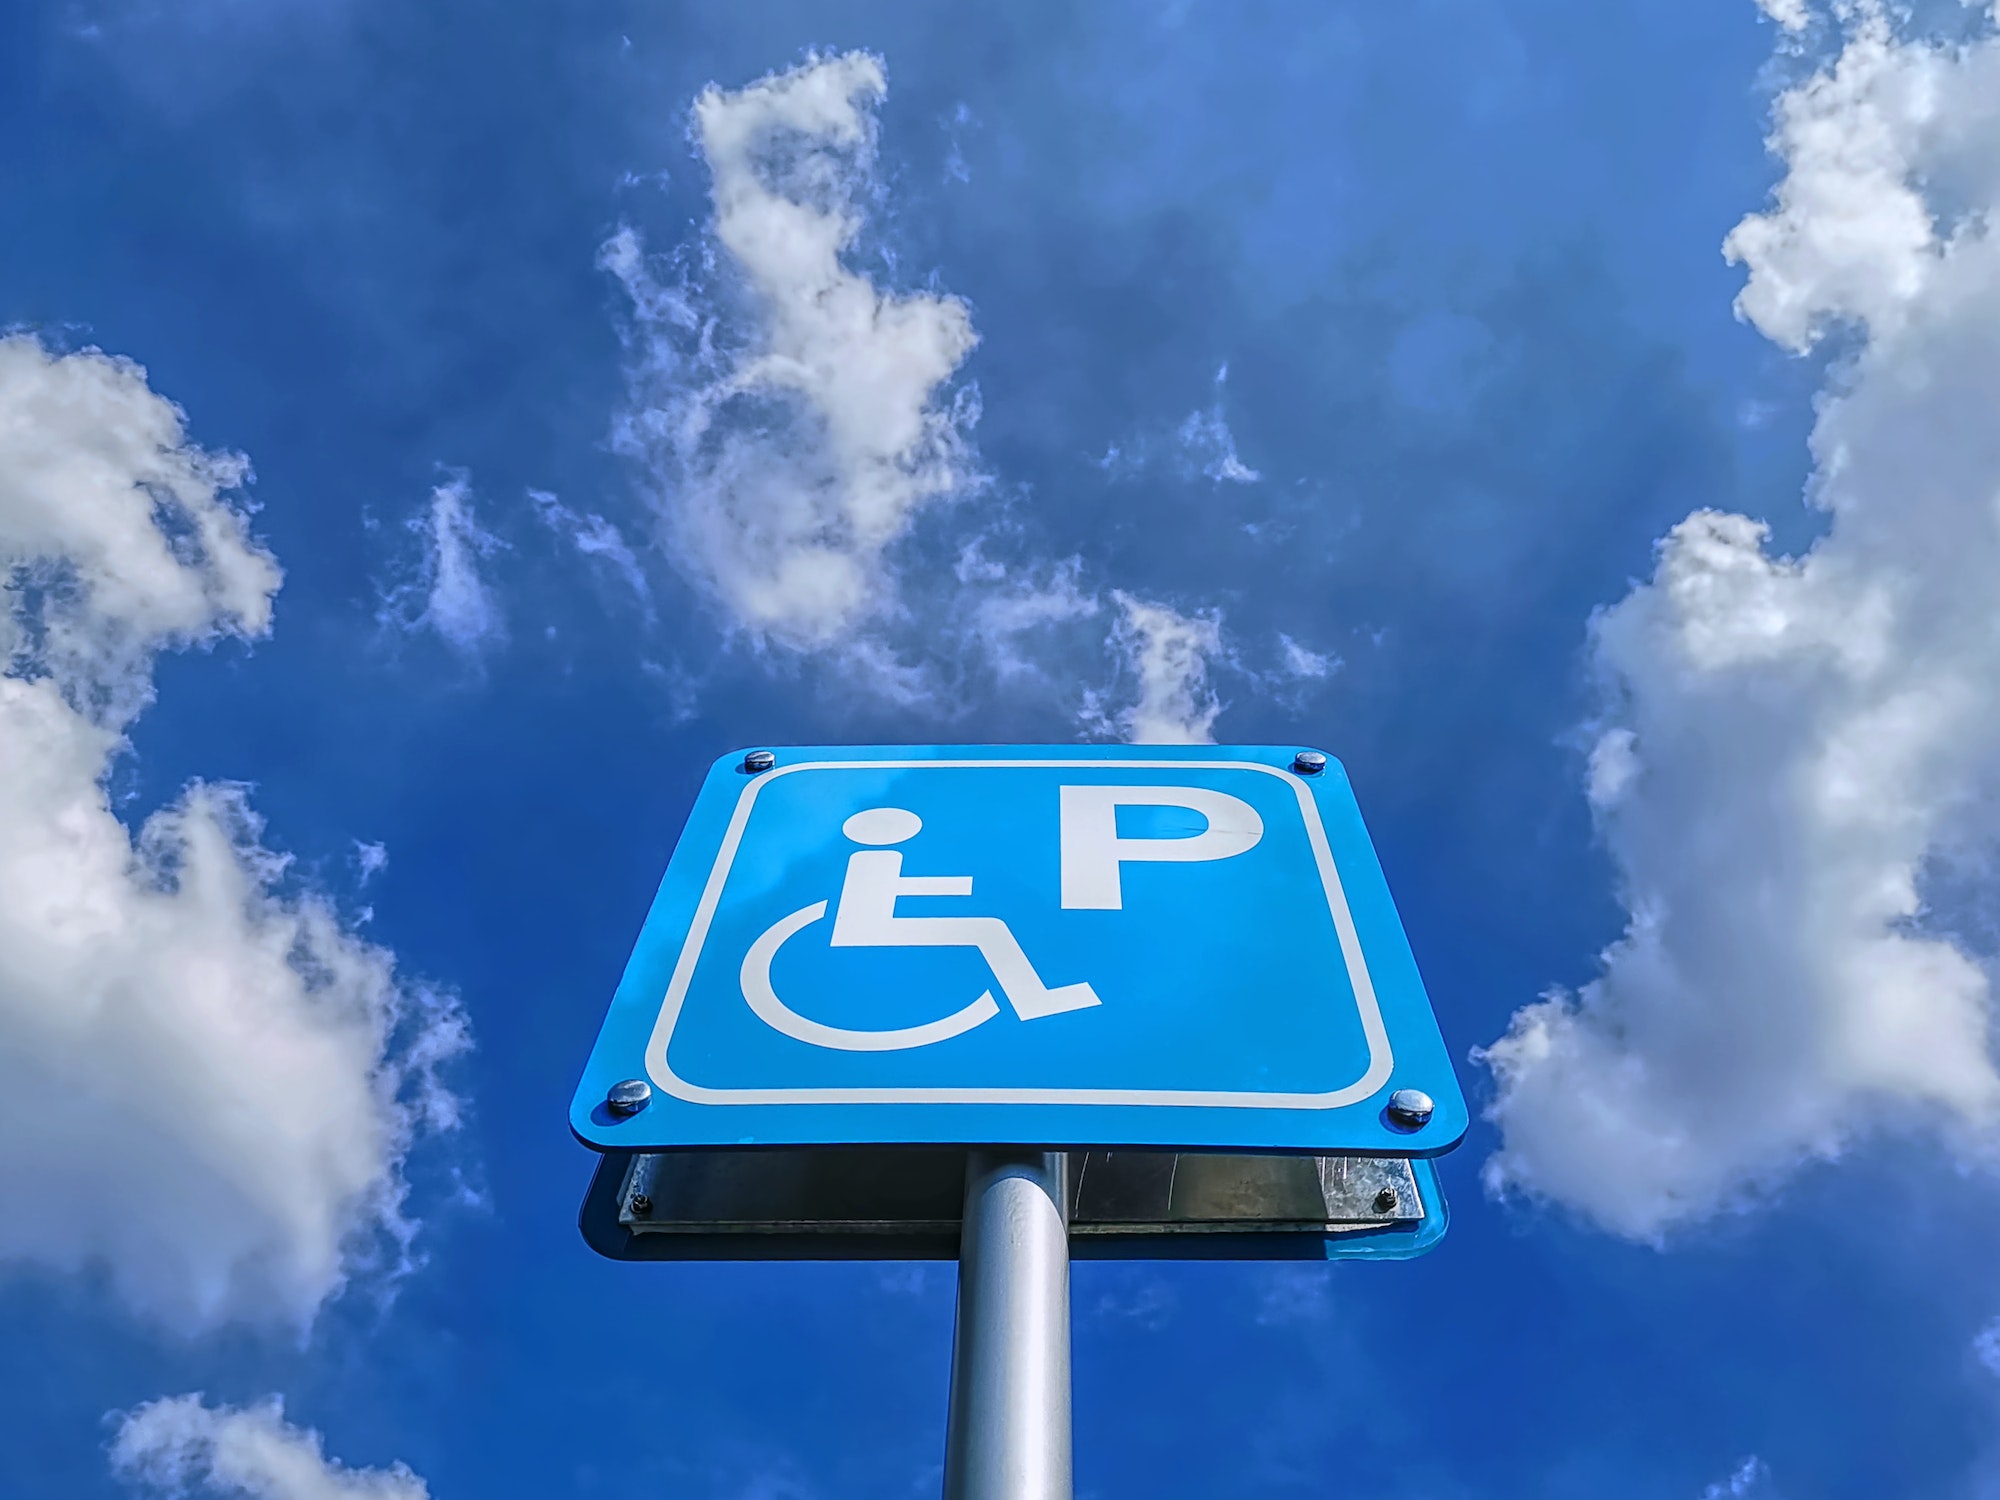 Low Angle View of Blue Handicapped Parking Sign Against Blue Cloudy Sky at Day Time